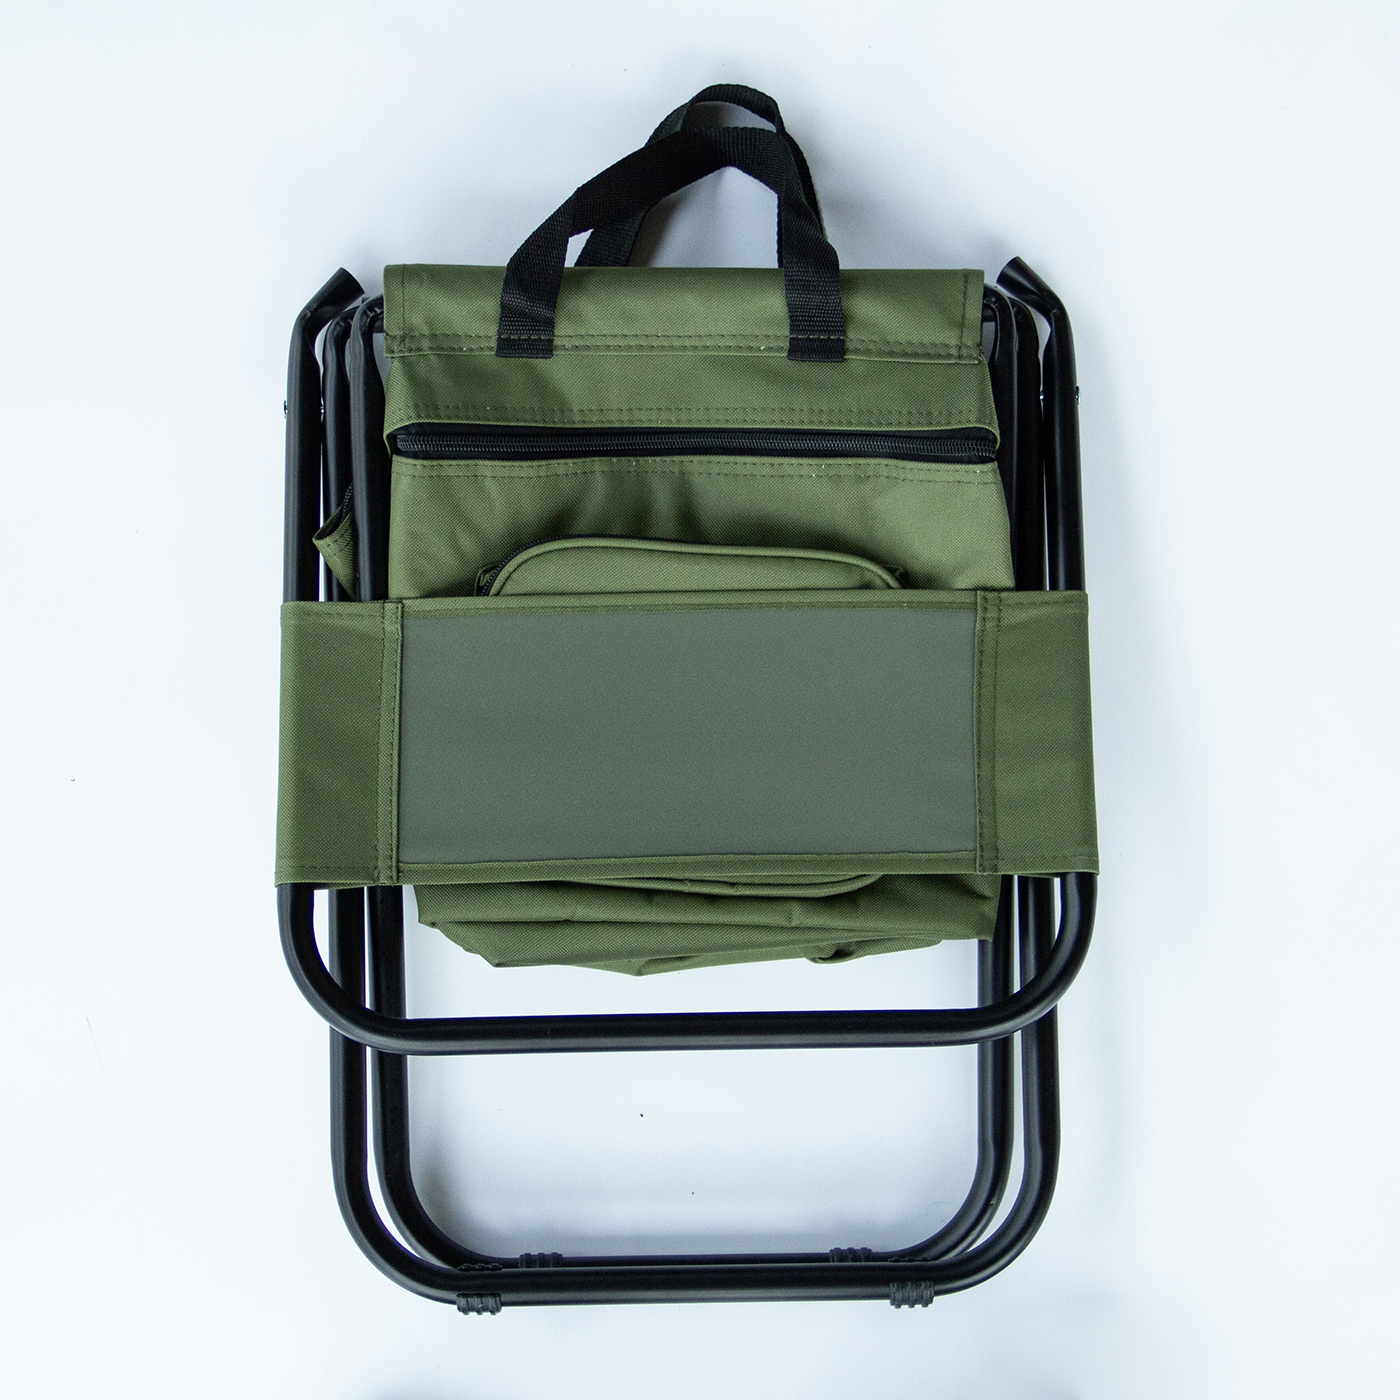 Folding Stool Chair With Cooler Bag3